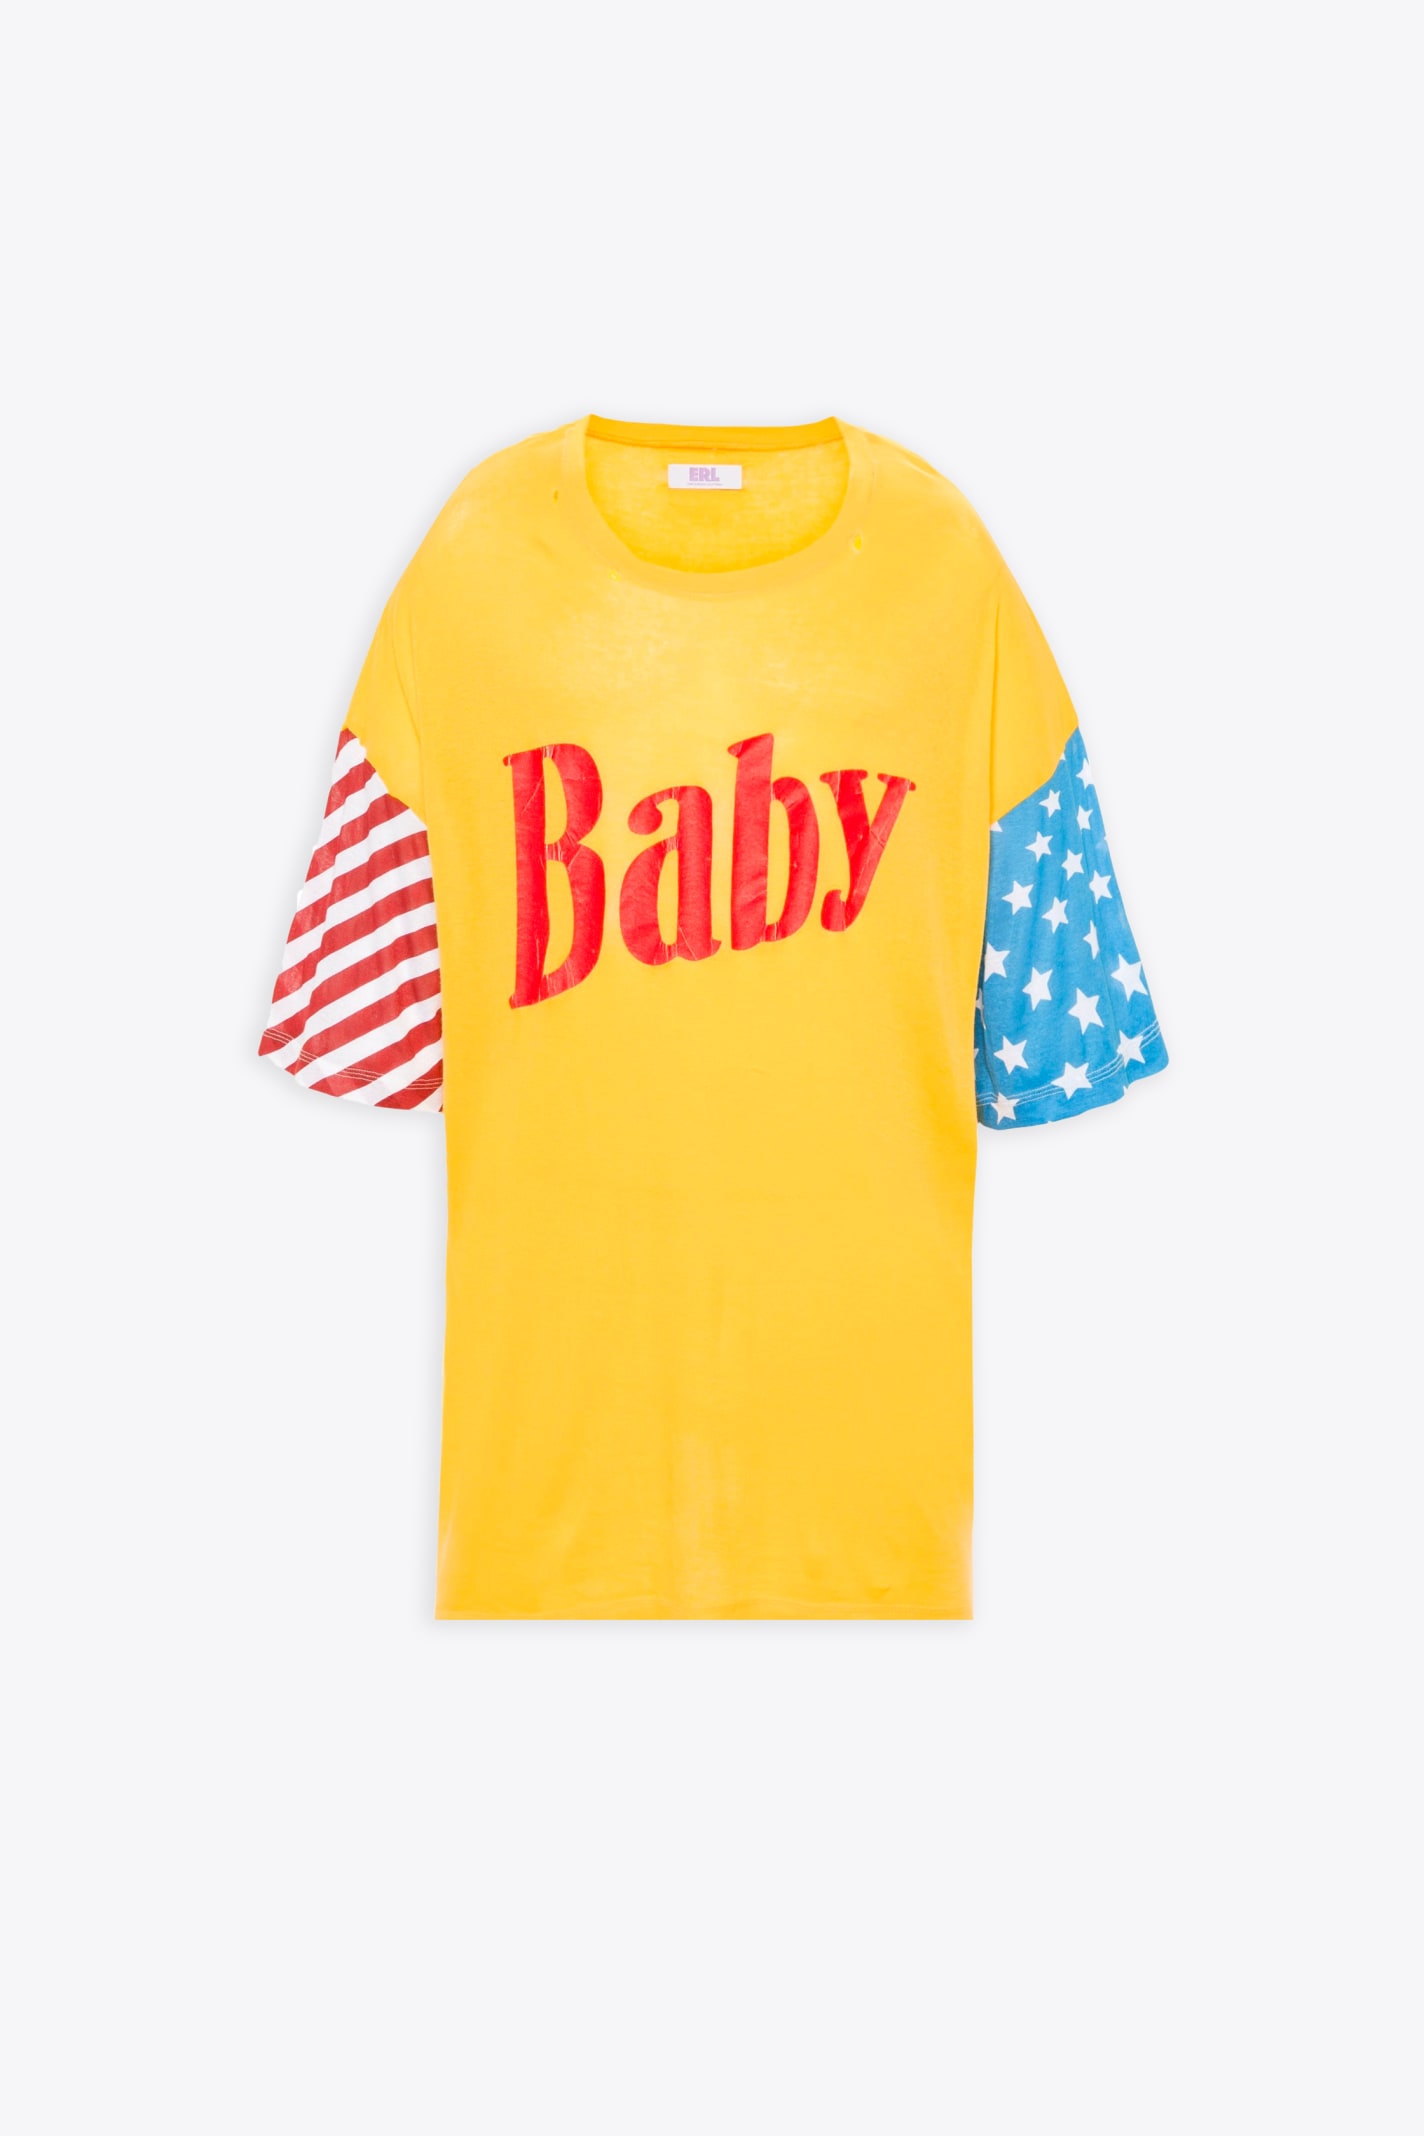 Shop Erl Unisex Printed Light Jersey Tshirt Yellow Distressed Cotton T-shirt With Baby Print - Unisex Printed In Giallo